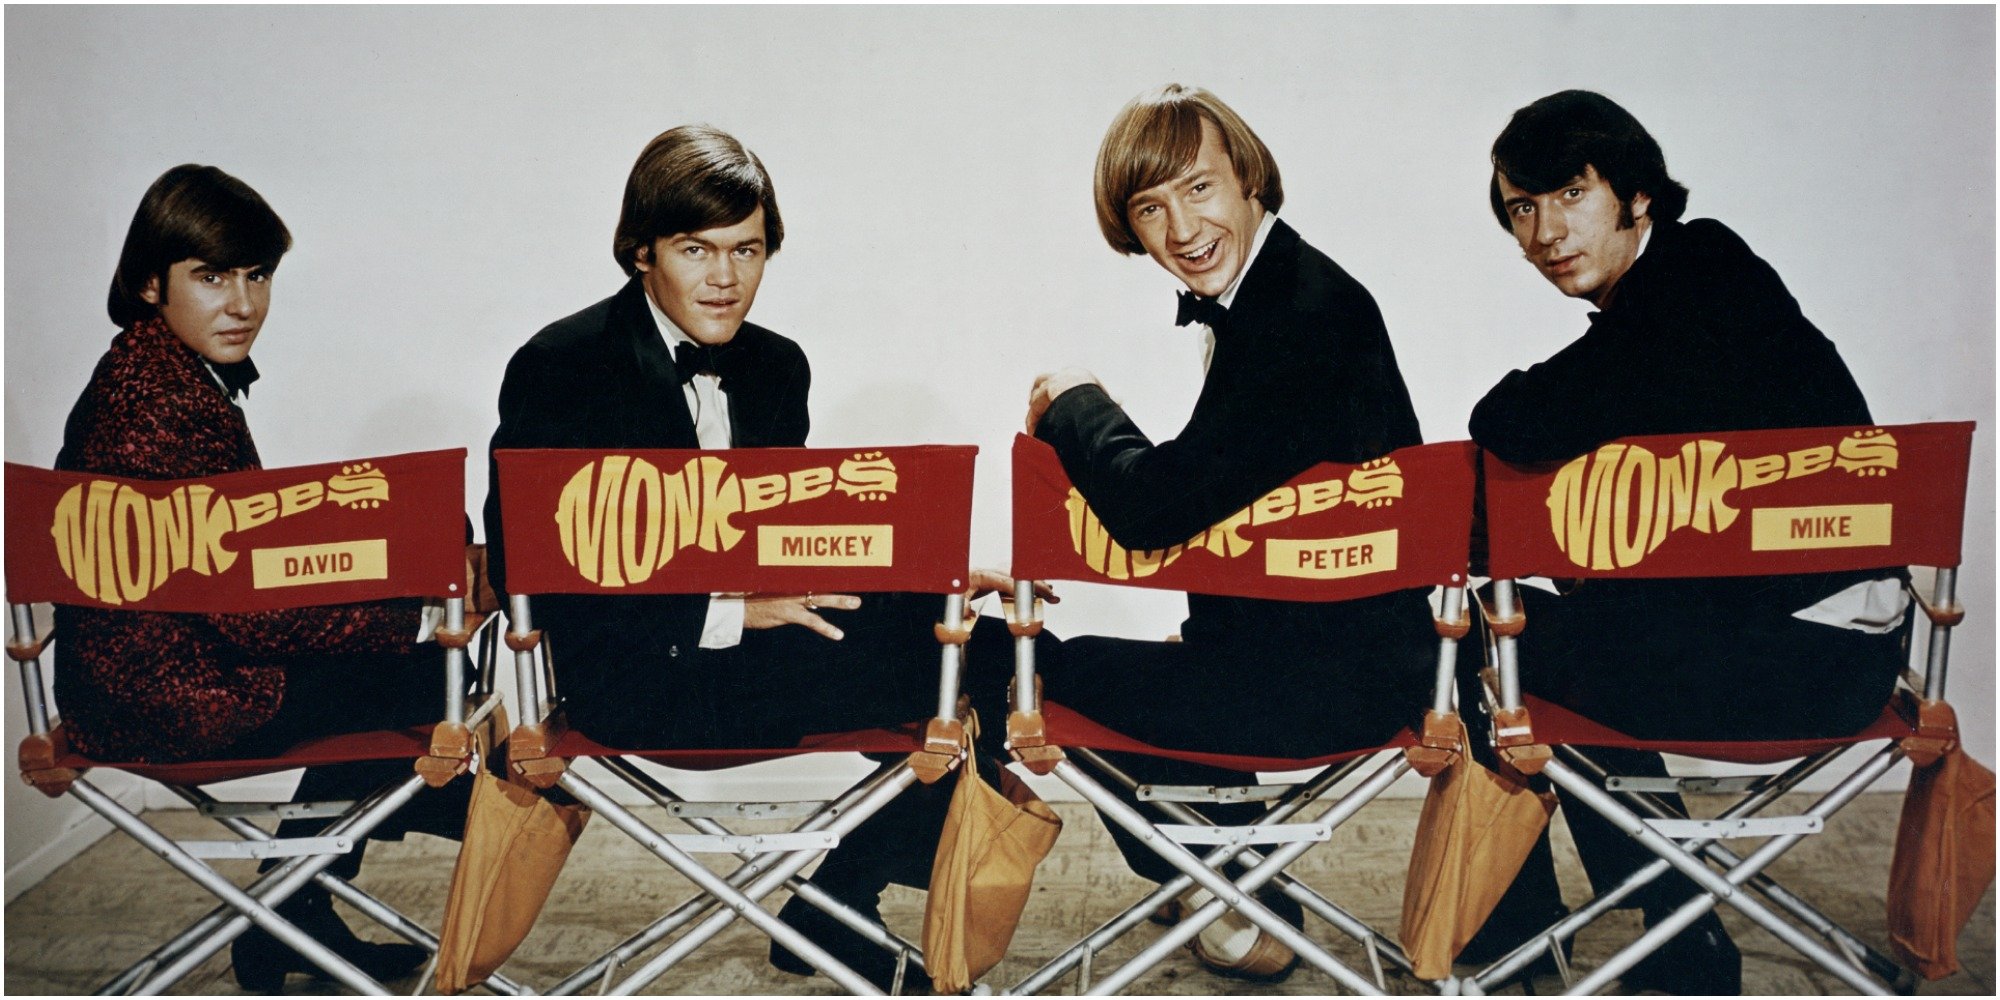 The Monkees cast includes Davy Jones, Mike Nesmith, Mickey Dolenz, and Peter Tork.